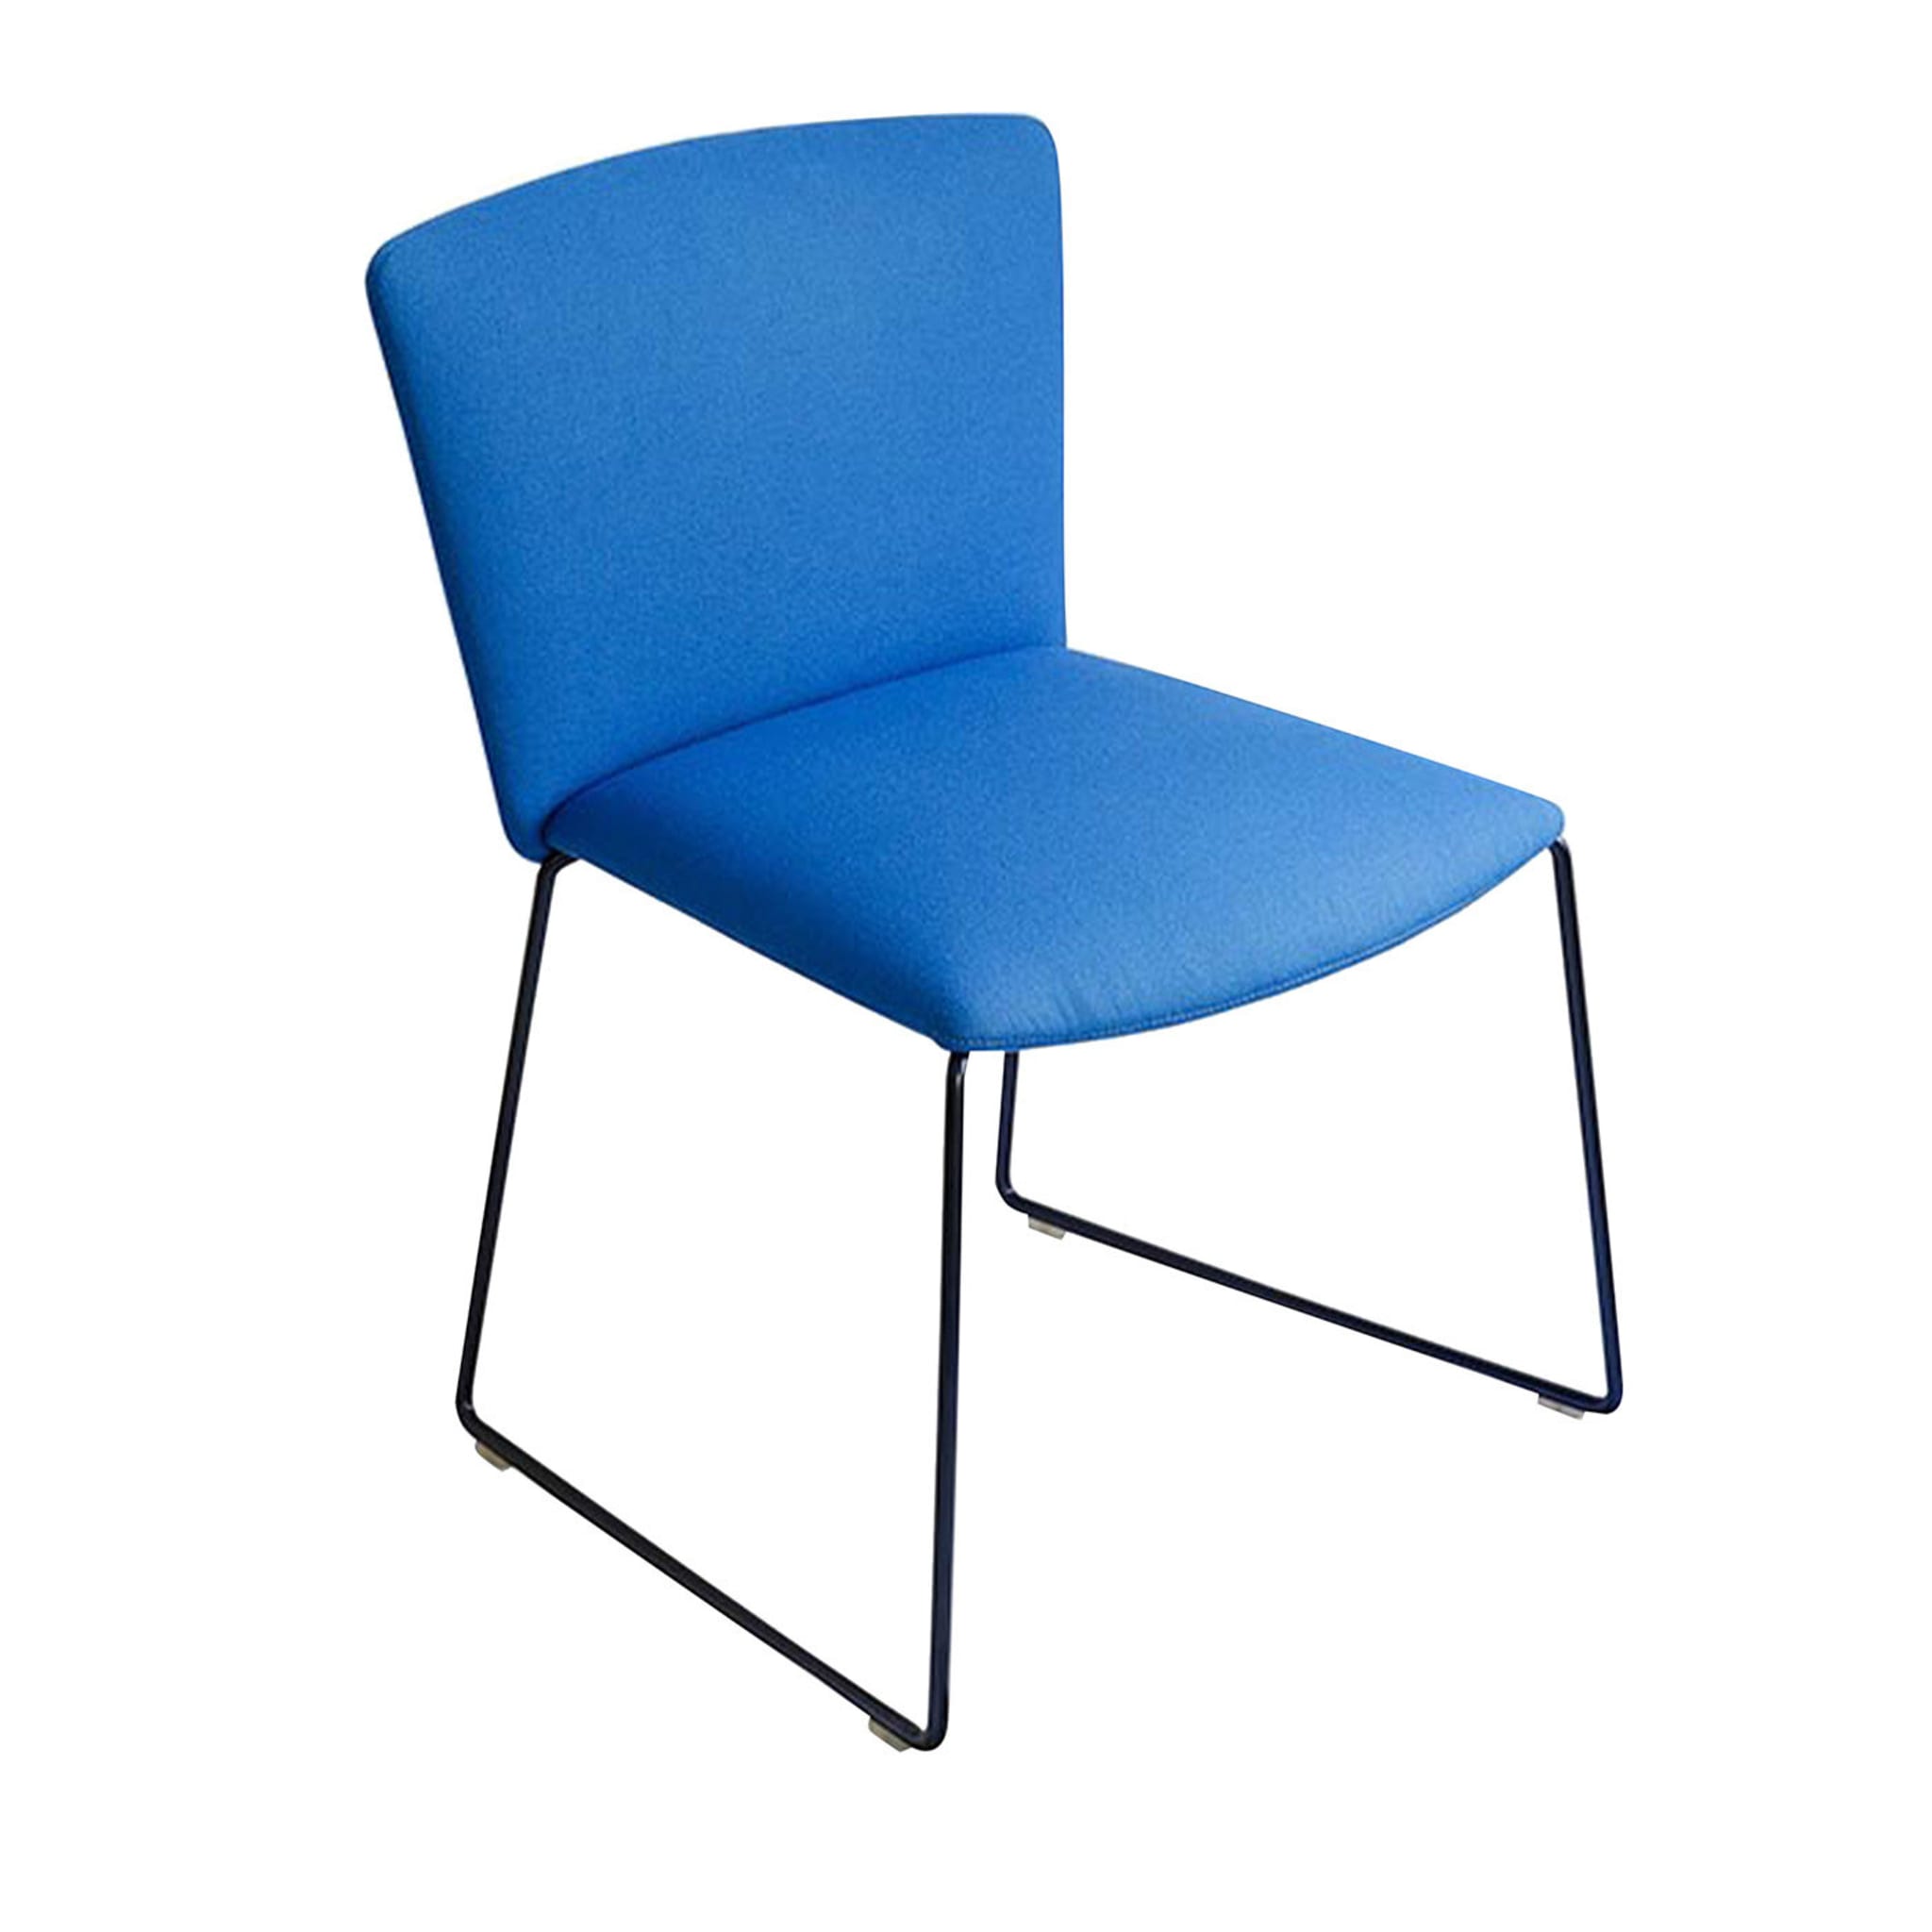 Vela Blue Sled Chair by Lievore Altherr Molina - Main view